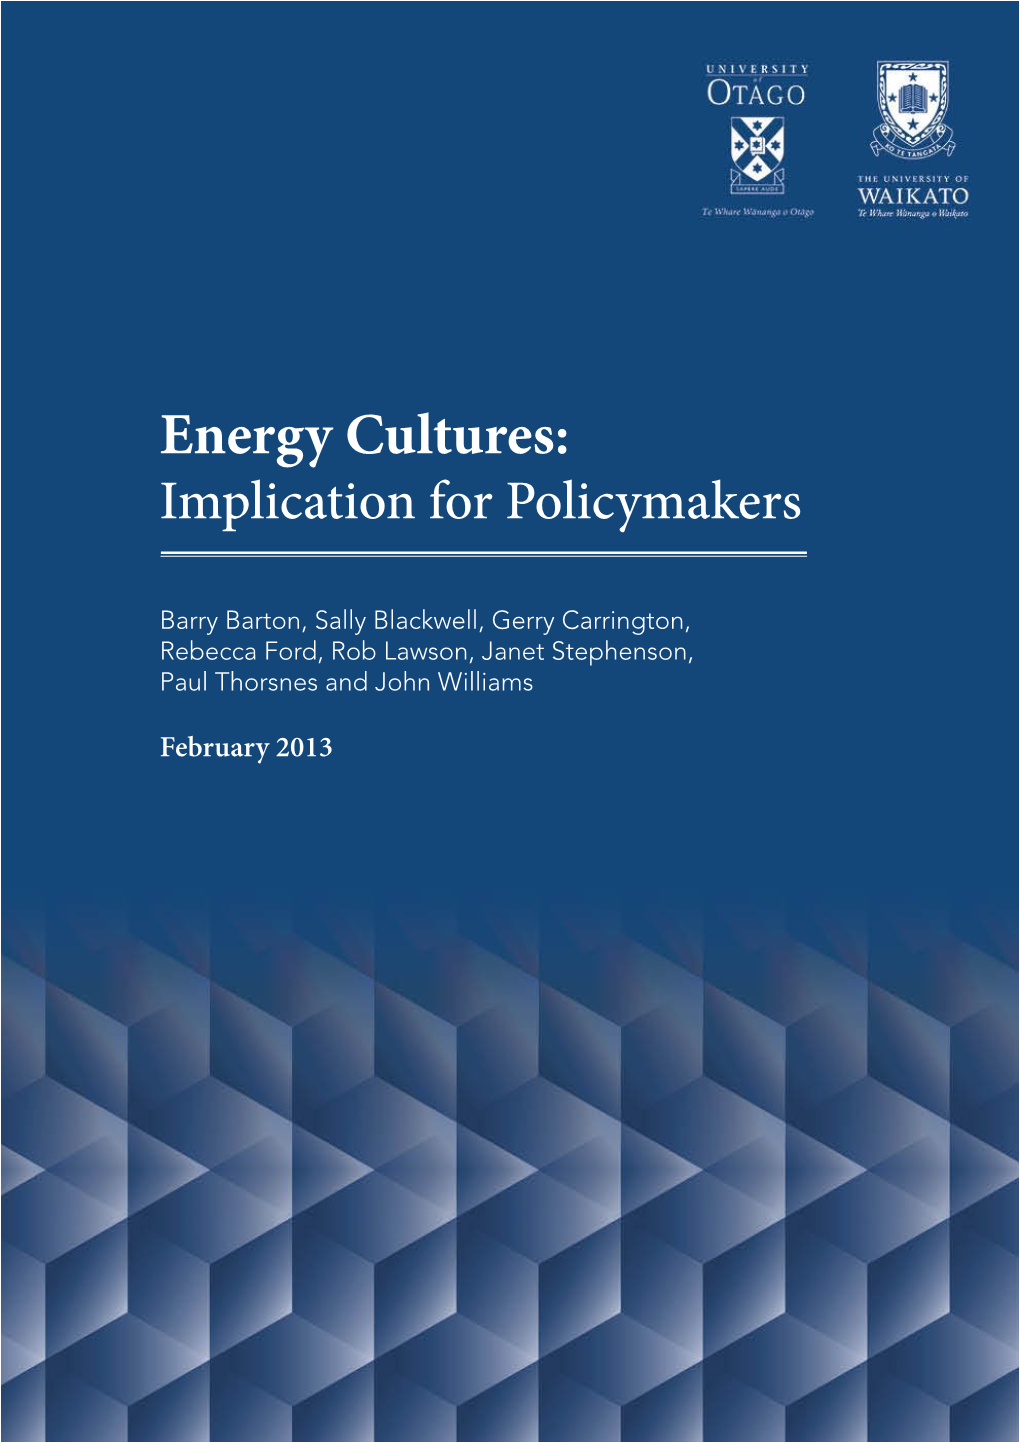 Energy Cultures: Implication for Policymakers